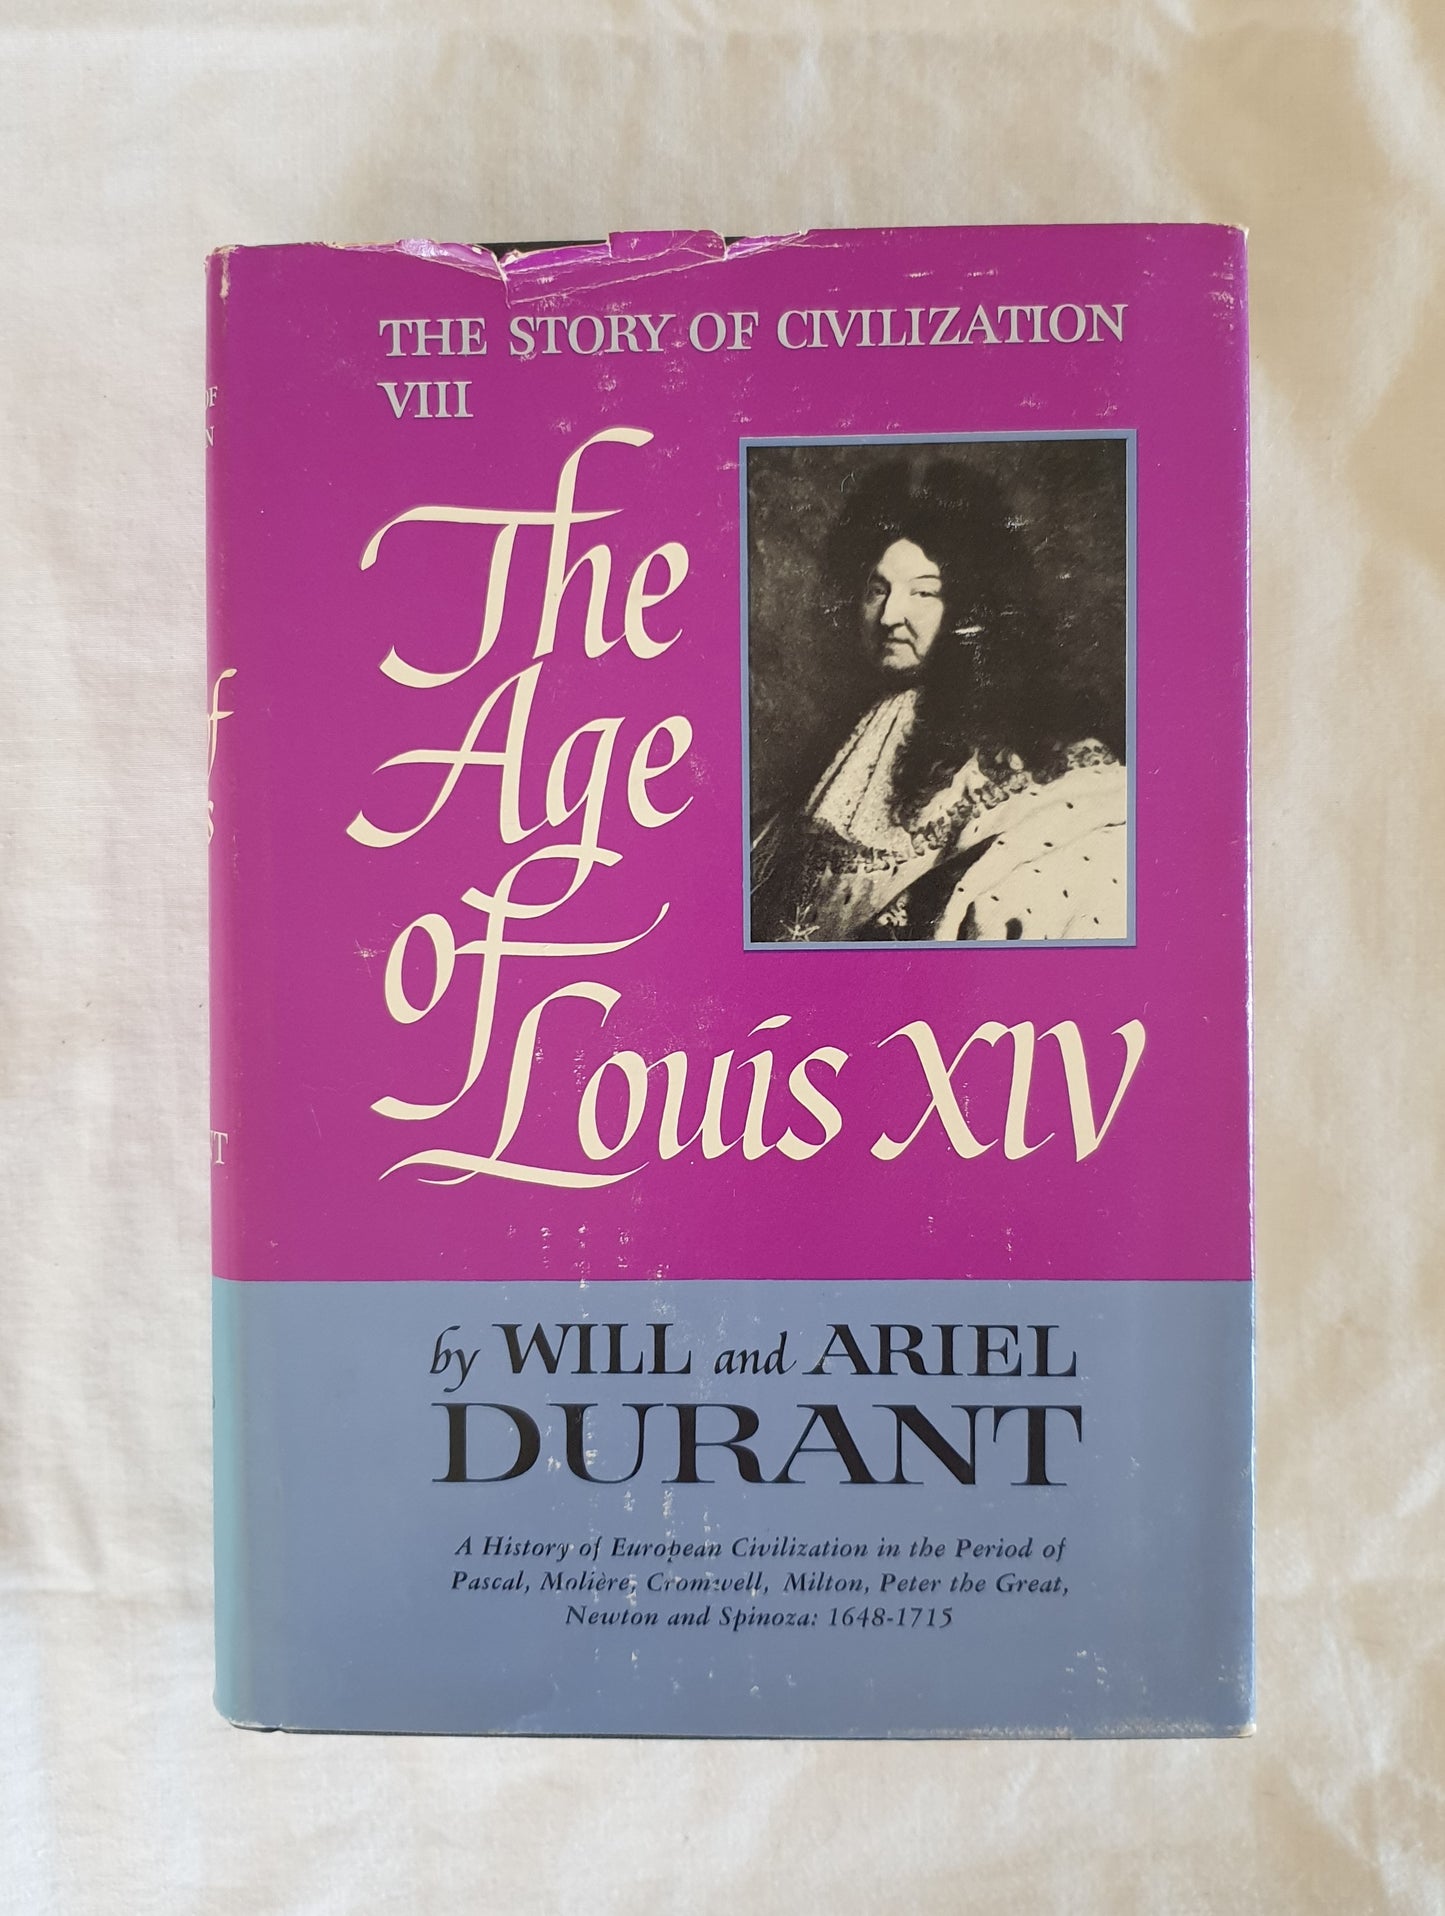 The Age of Louis XIV by Will and Ariel Durant